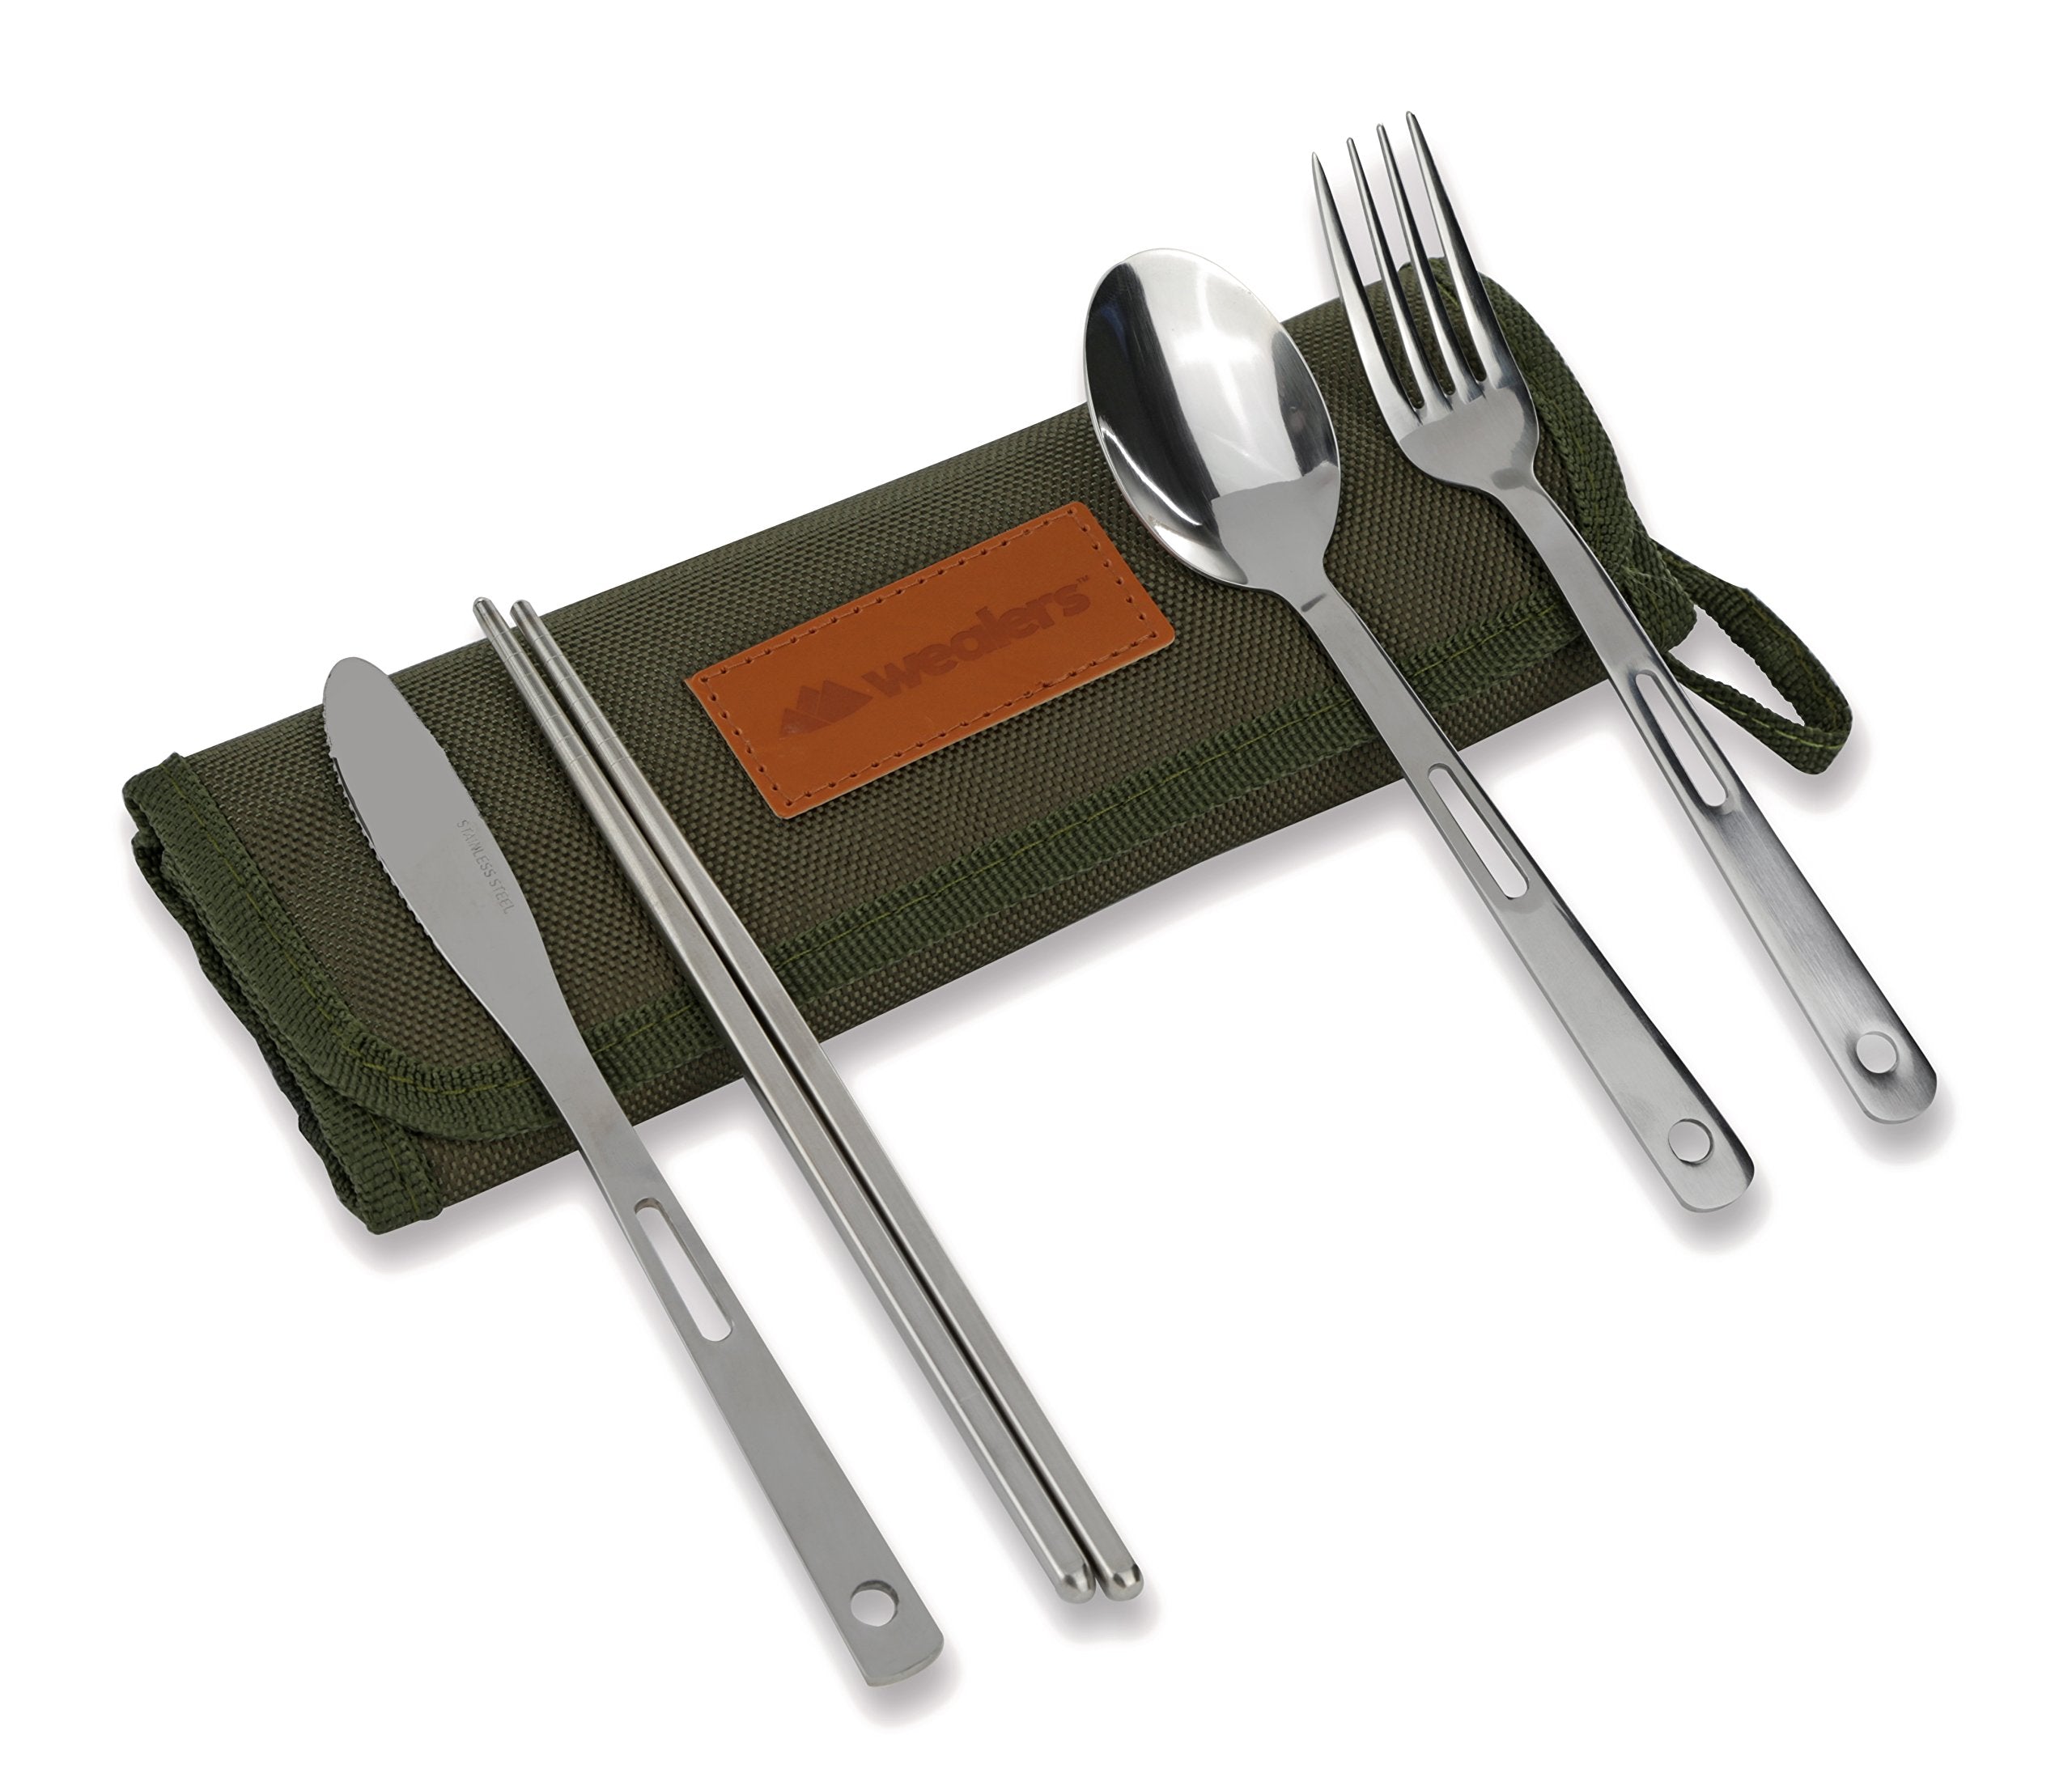 13 Piece Stainless Steel Family Cutlery Picnic Utensil Set with Travel Case for Camping | Hiking | BBQs - Includes Forks | Spoons | Knifes | Chopstick, Plus Nylon Commuter Case (Green)